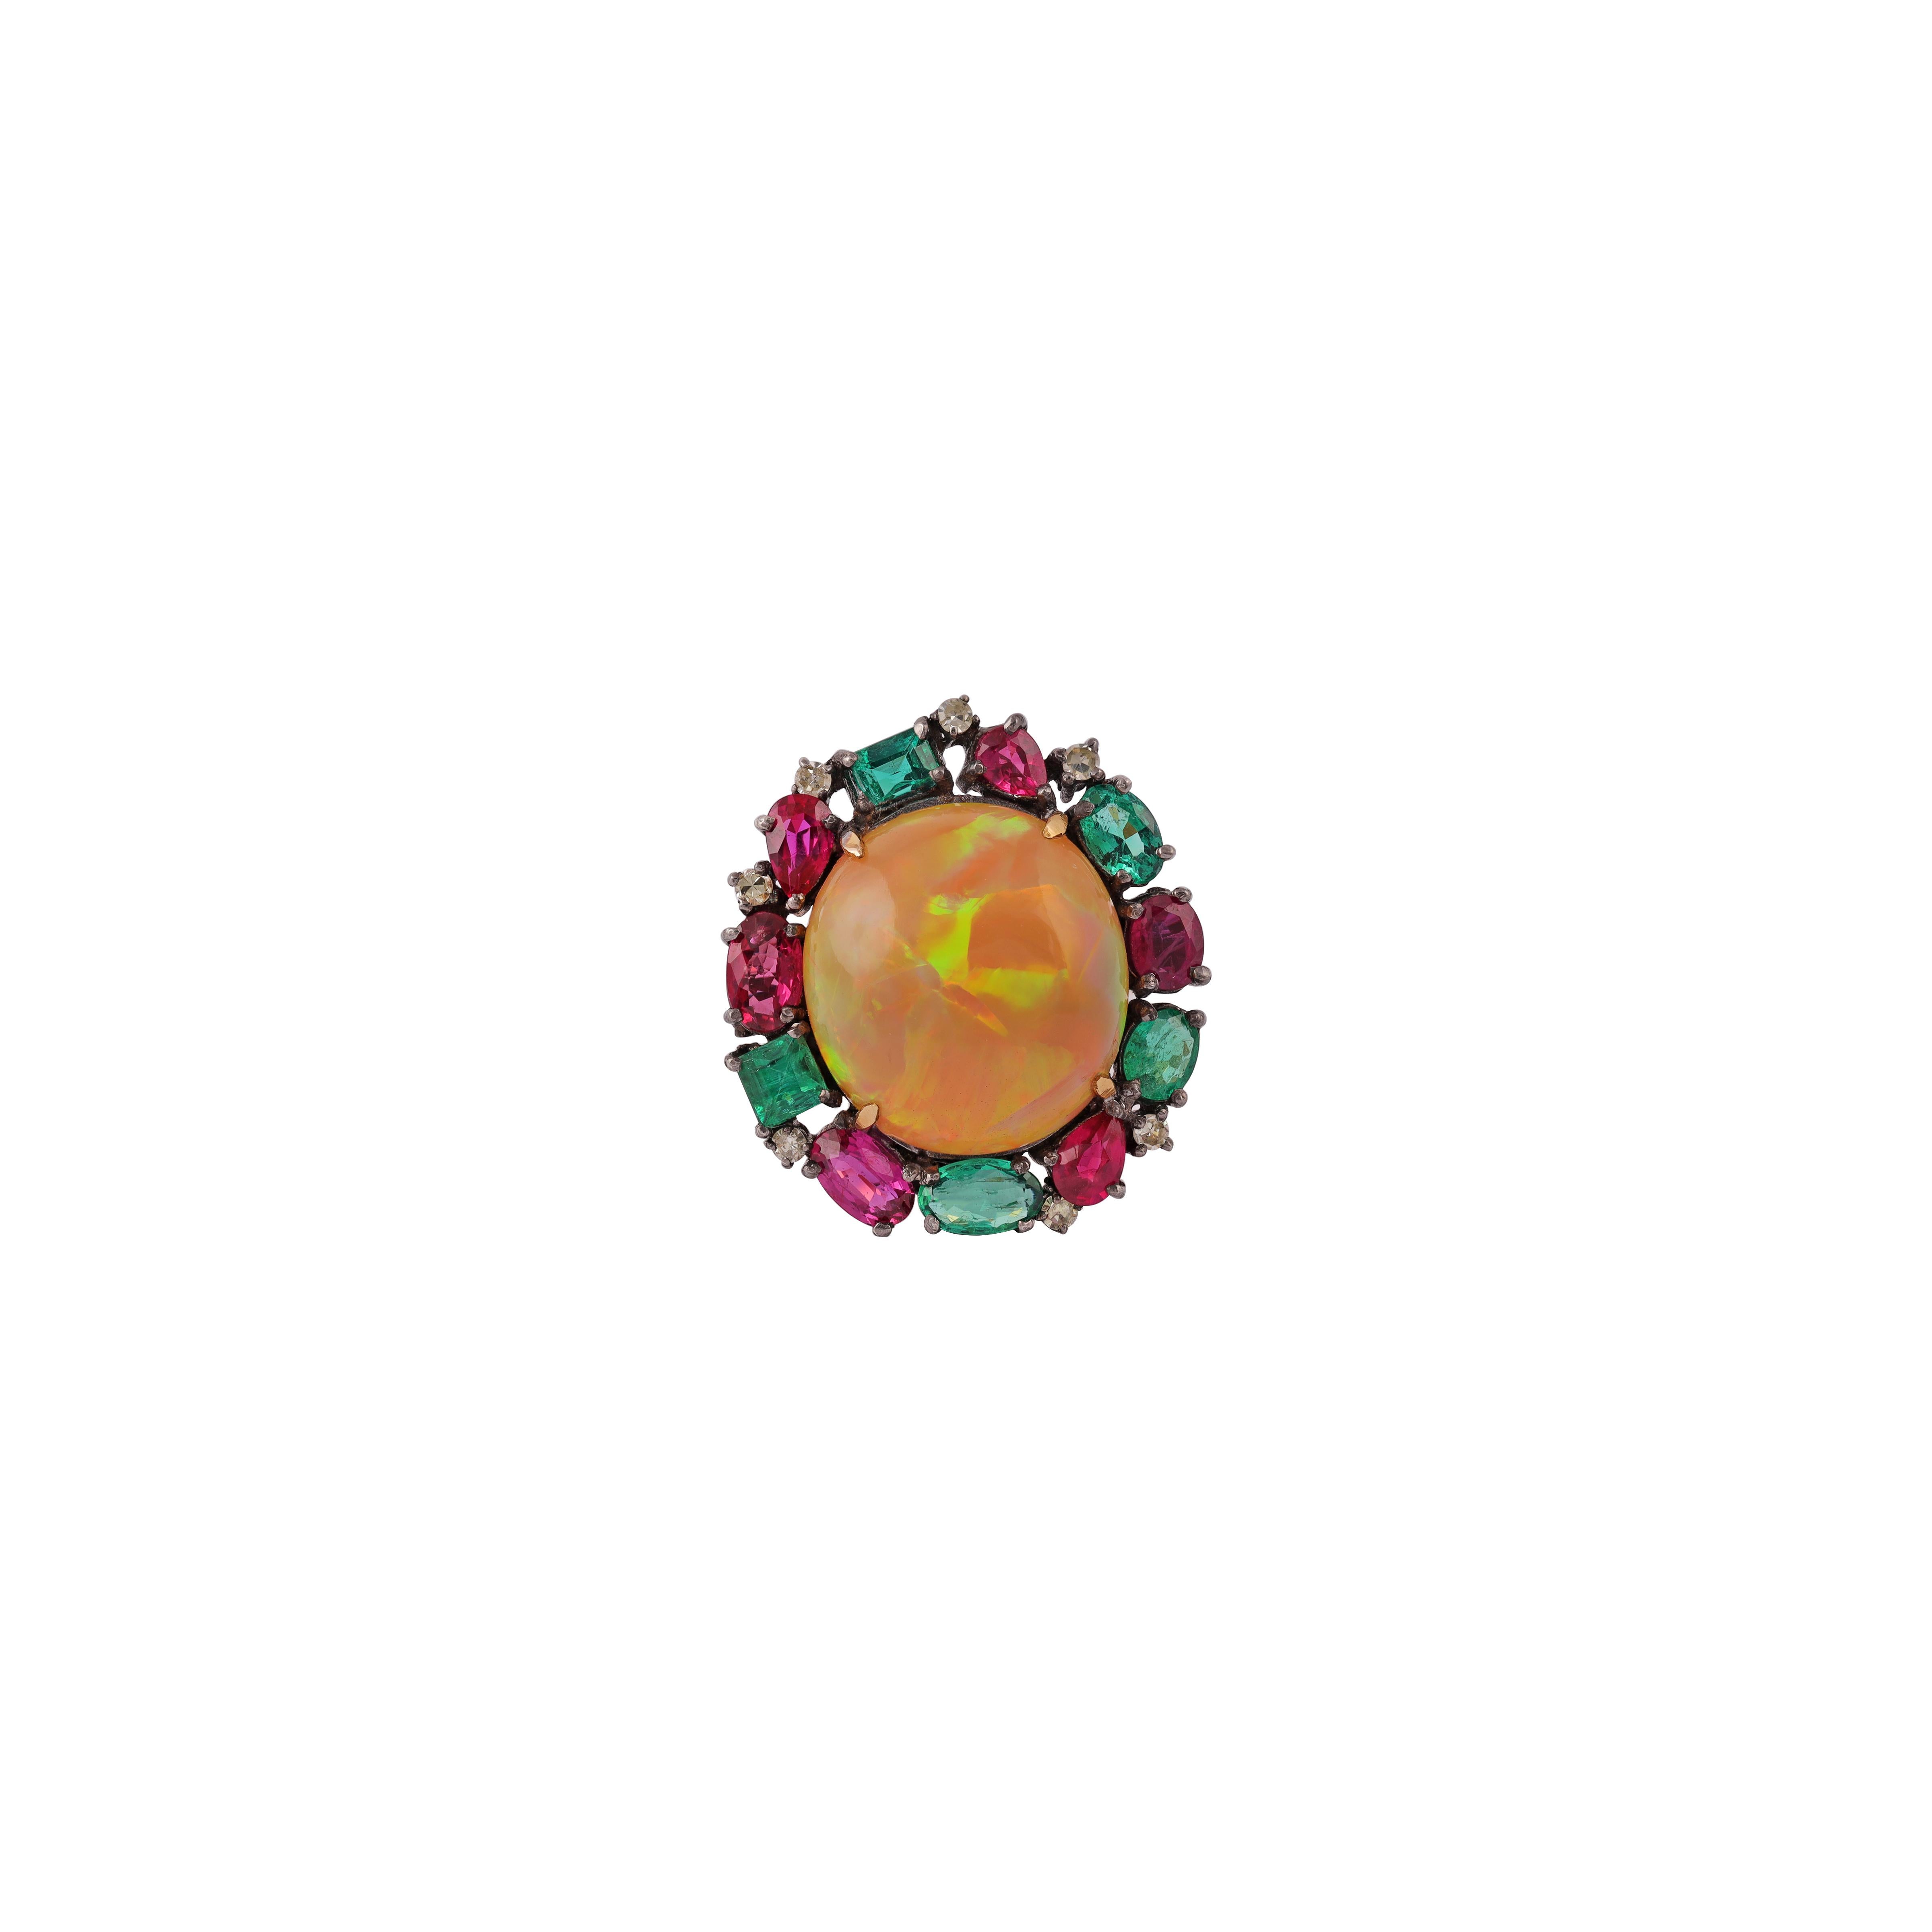 Beautiful Antique Victorian 14K Yellow Gold & silver  Fire Opal Emerald &  Diamond Cocktail Ring. This incredible cocktail ring is crafted in 14k yellow gold & silver . The center holds a natural vibrant opal with an incredible play of color